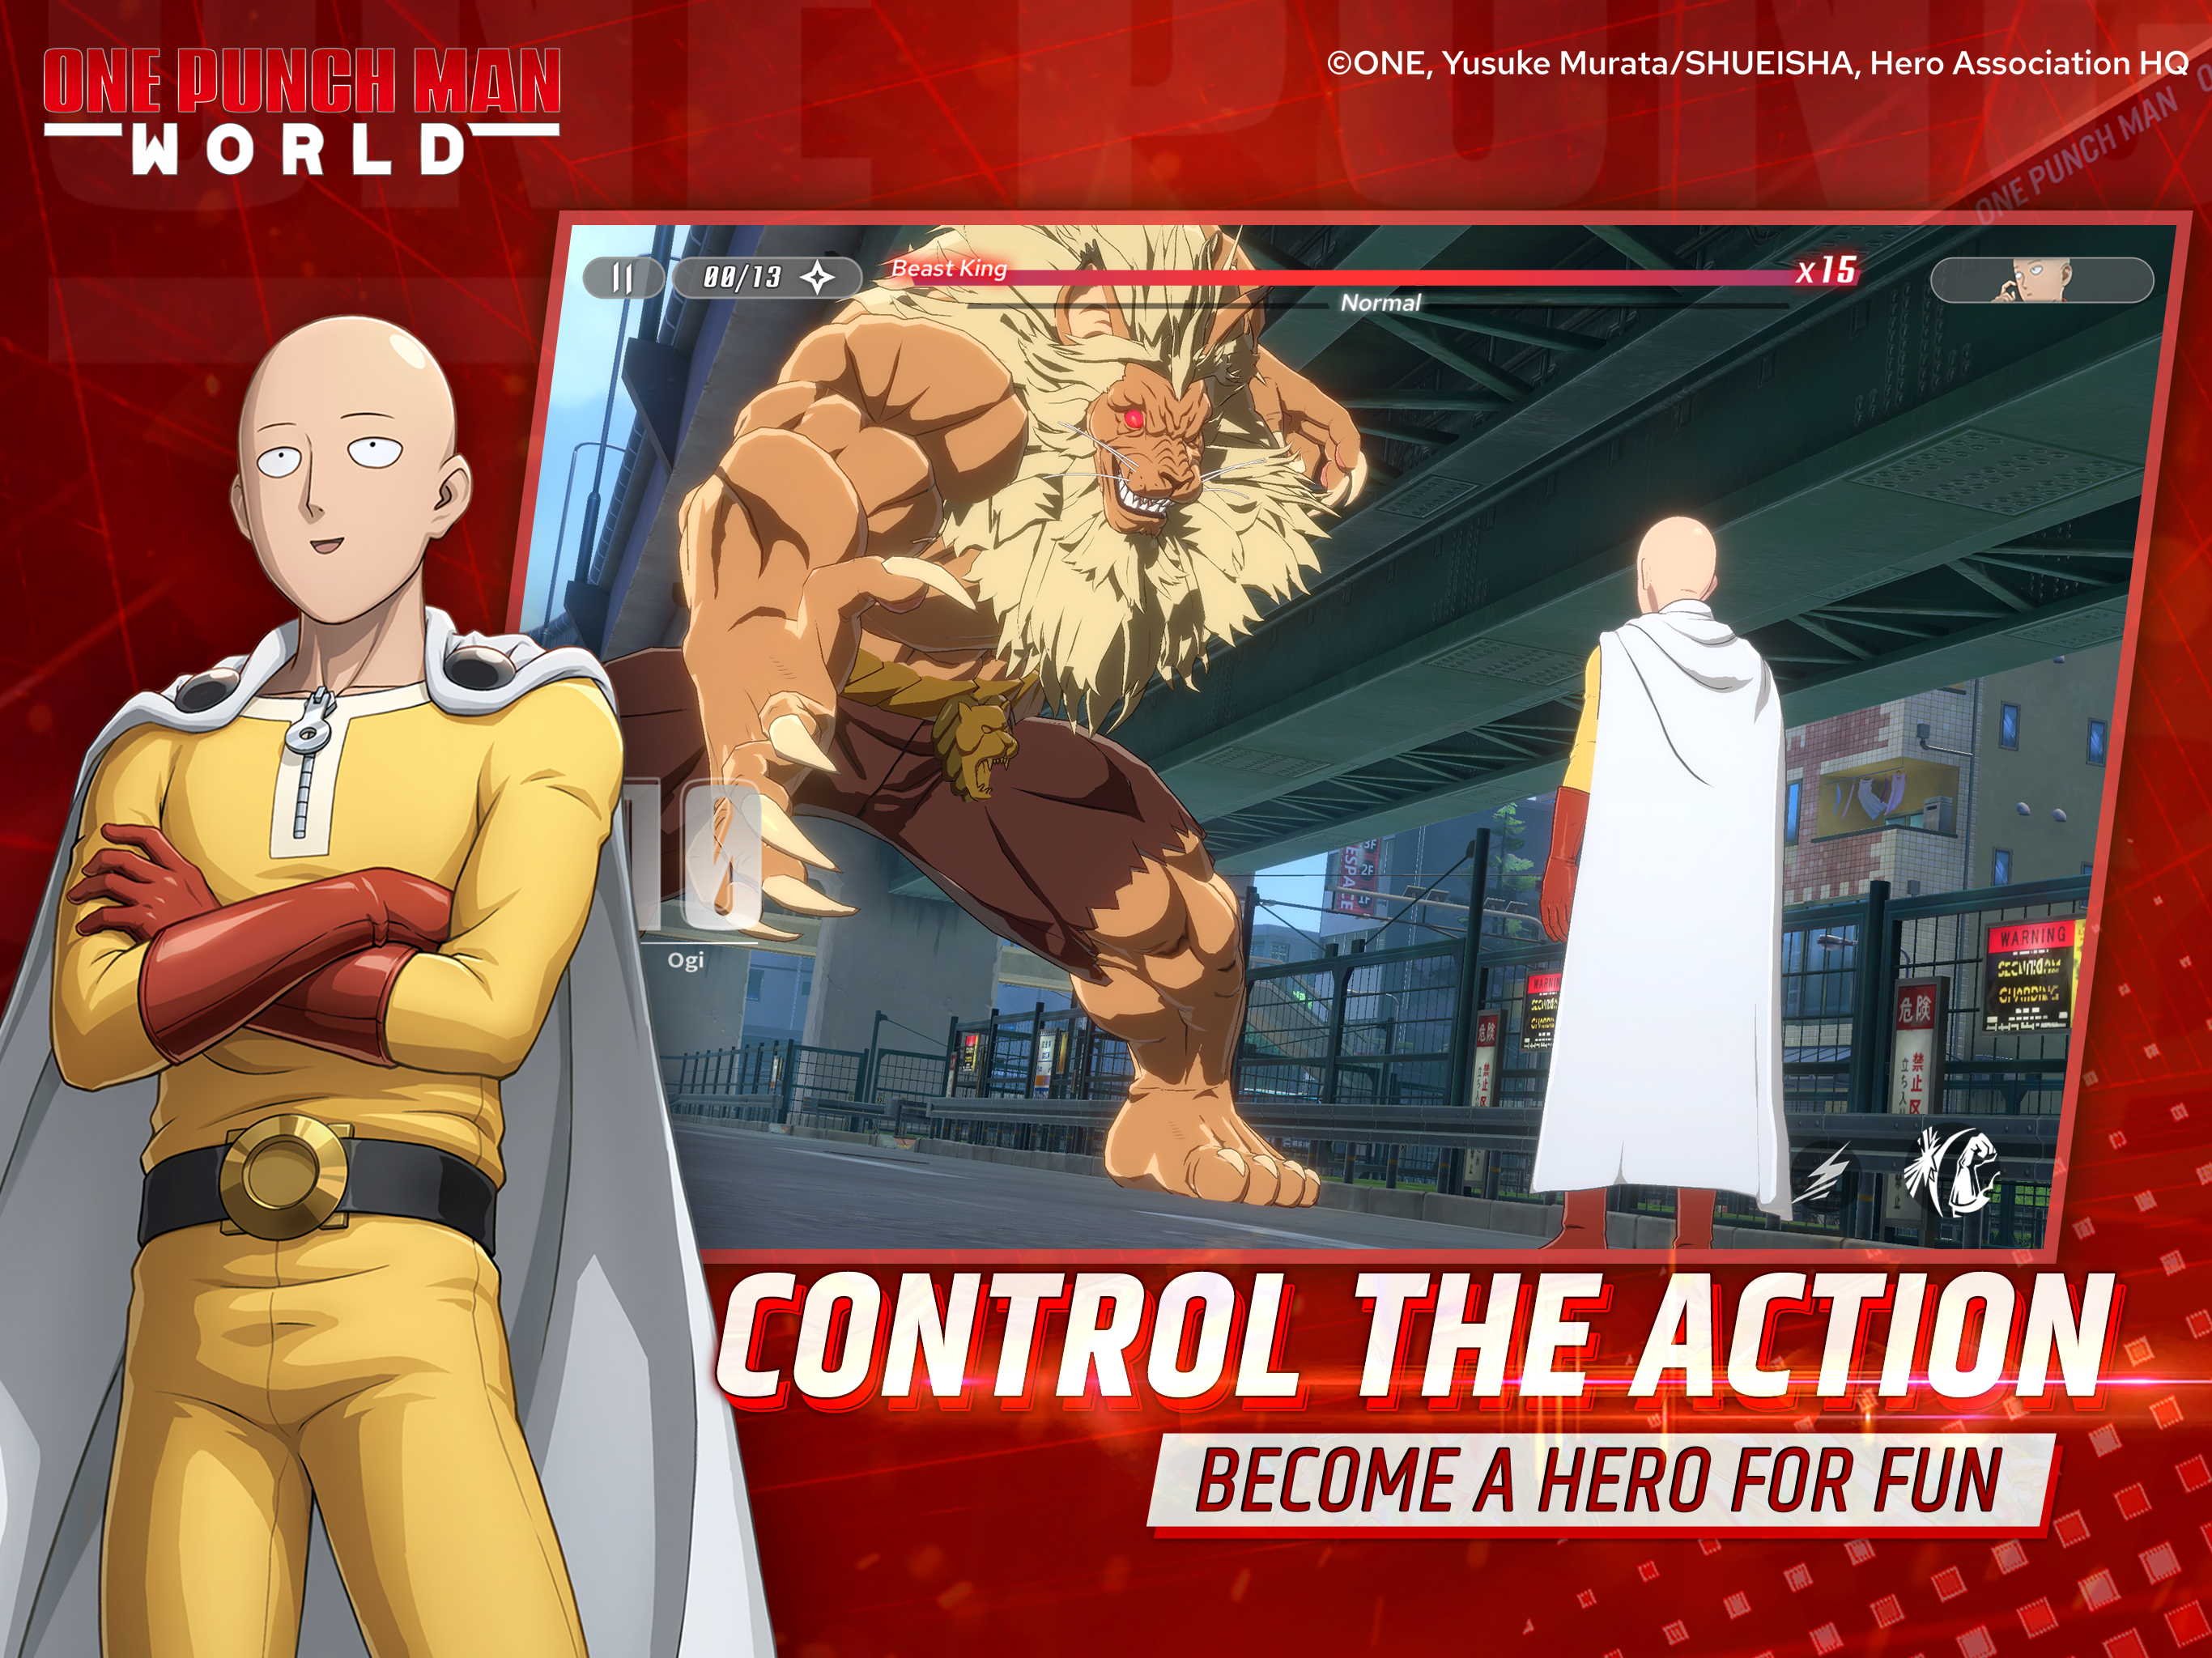 Some of the art for the upcoming One Punch Man: World game (PC